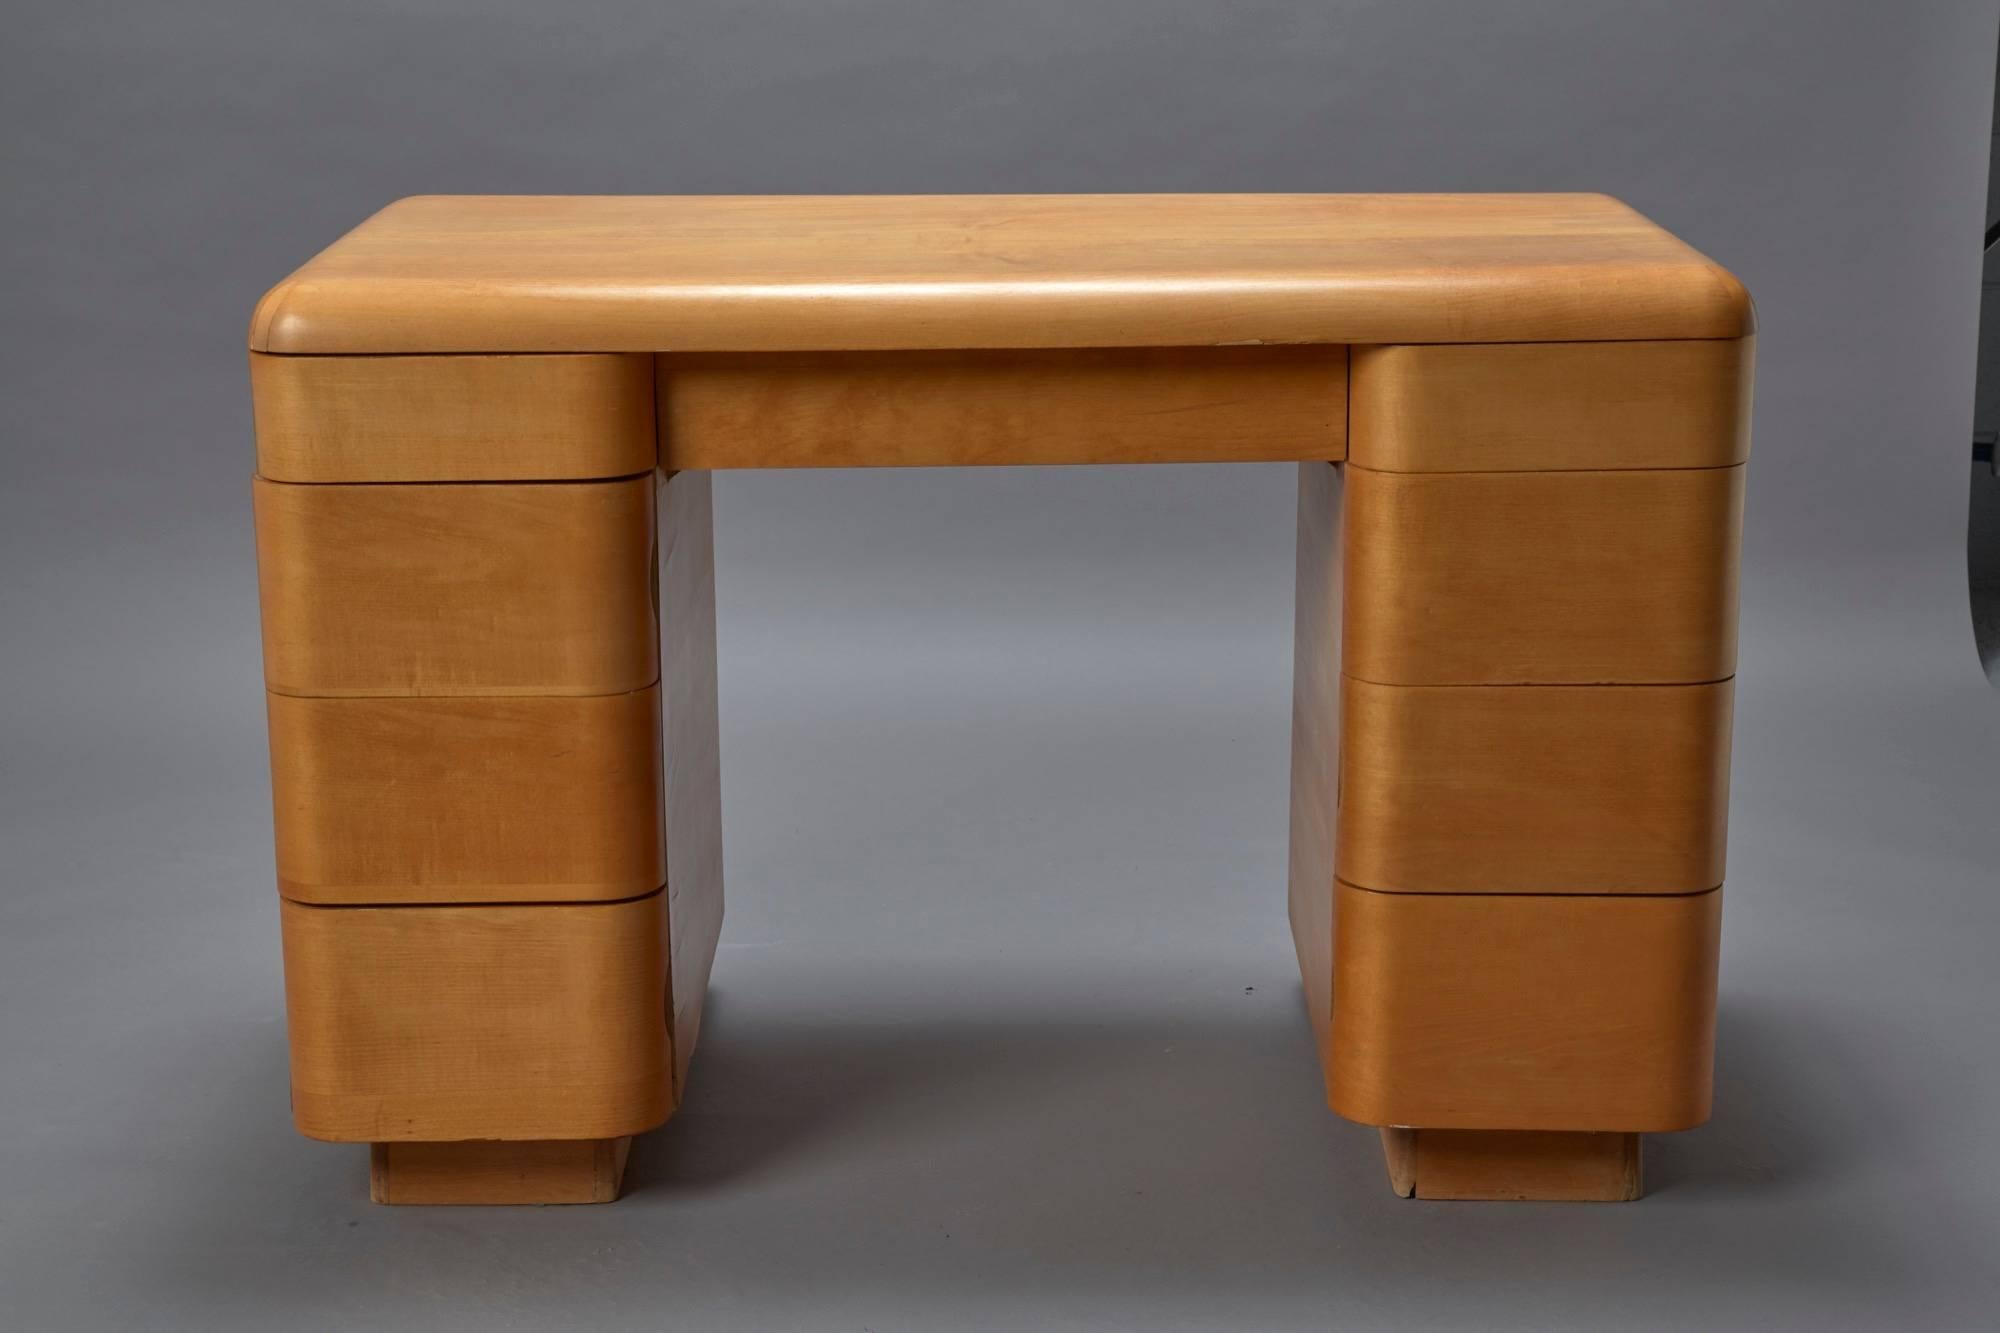 This Art Deco-style bentwood Mid-Century Modern writing desk was designed by Paul Goldman in 1946 for Plymold Co. This desk has eight drawers and one central long drawer that are flushed into the frame when closed.